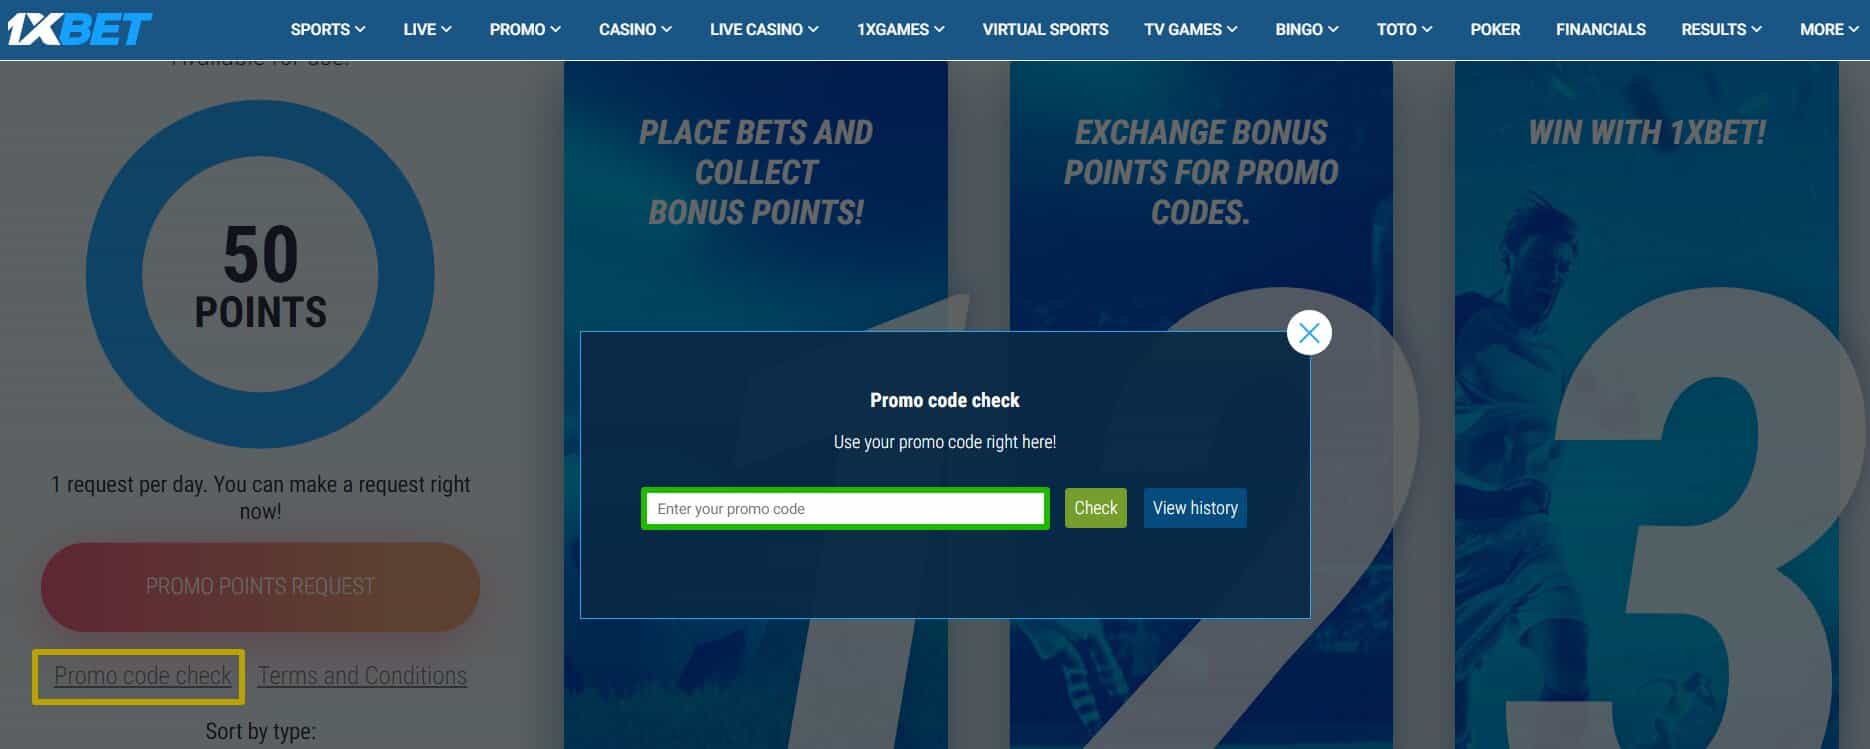 1XBET Promo Code Nigeria 2020. 󾟛 + 100 € or + 30% to the ...